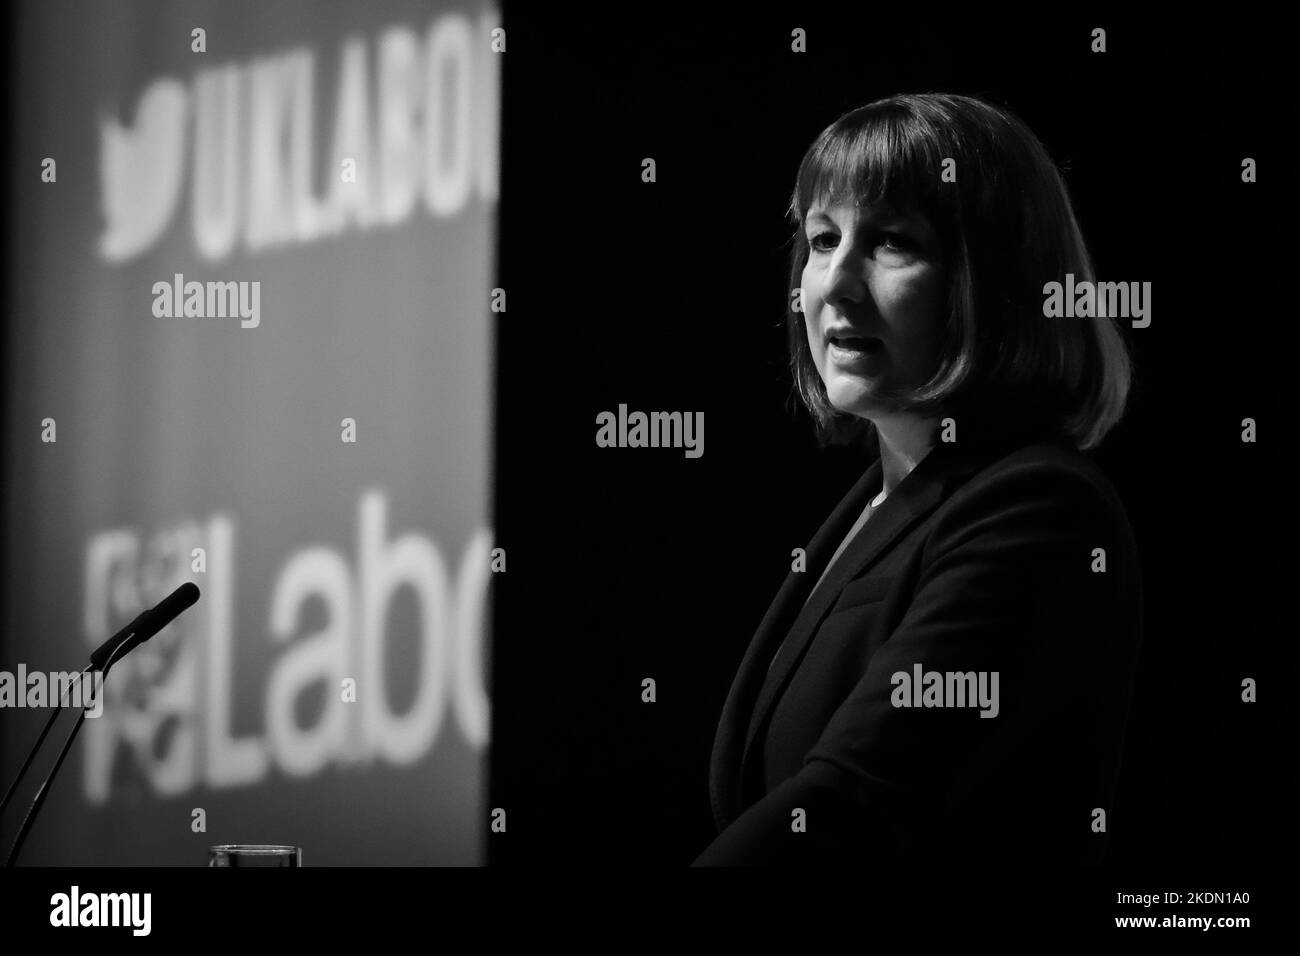 Rachel Reeves, (Shadow Chancellor of the Exchequer), makes her keynote speech at mid-day on day 2. photographed during the Labour Party Autumn Conference held at Acc Liverpool , Liverpool on Monday 26 September 2022 . Picture by Julie Edwards. Stock Photo